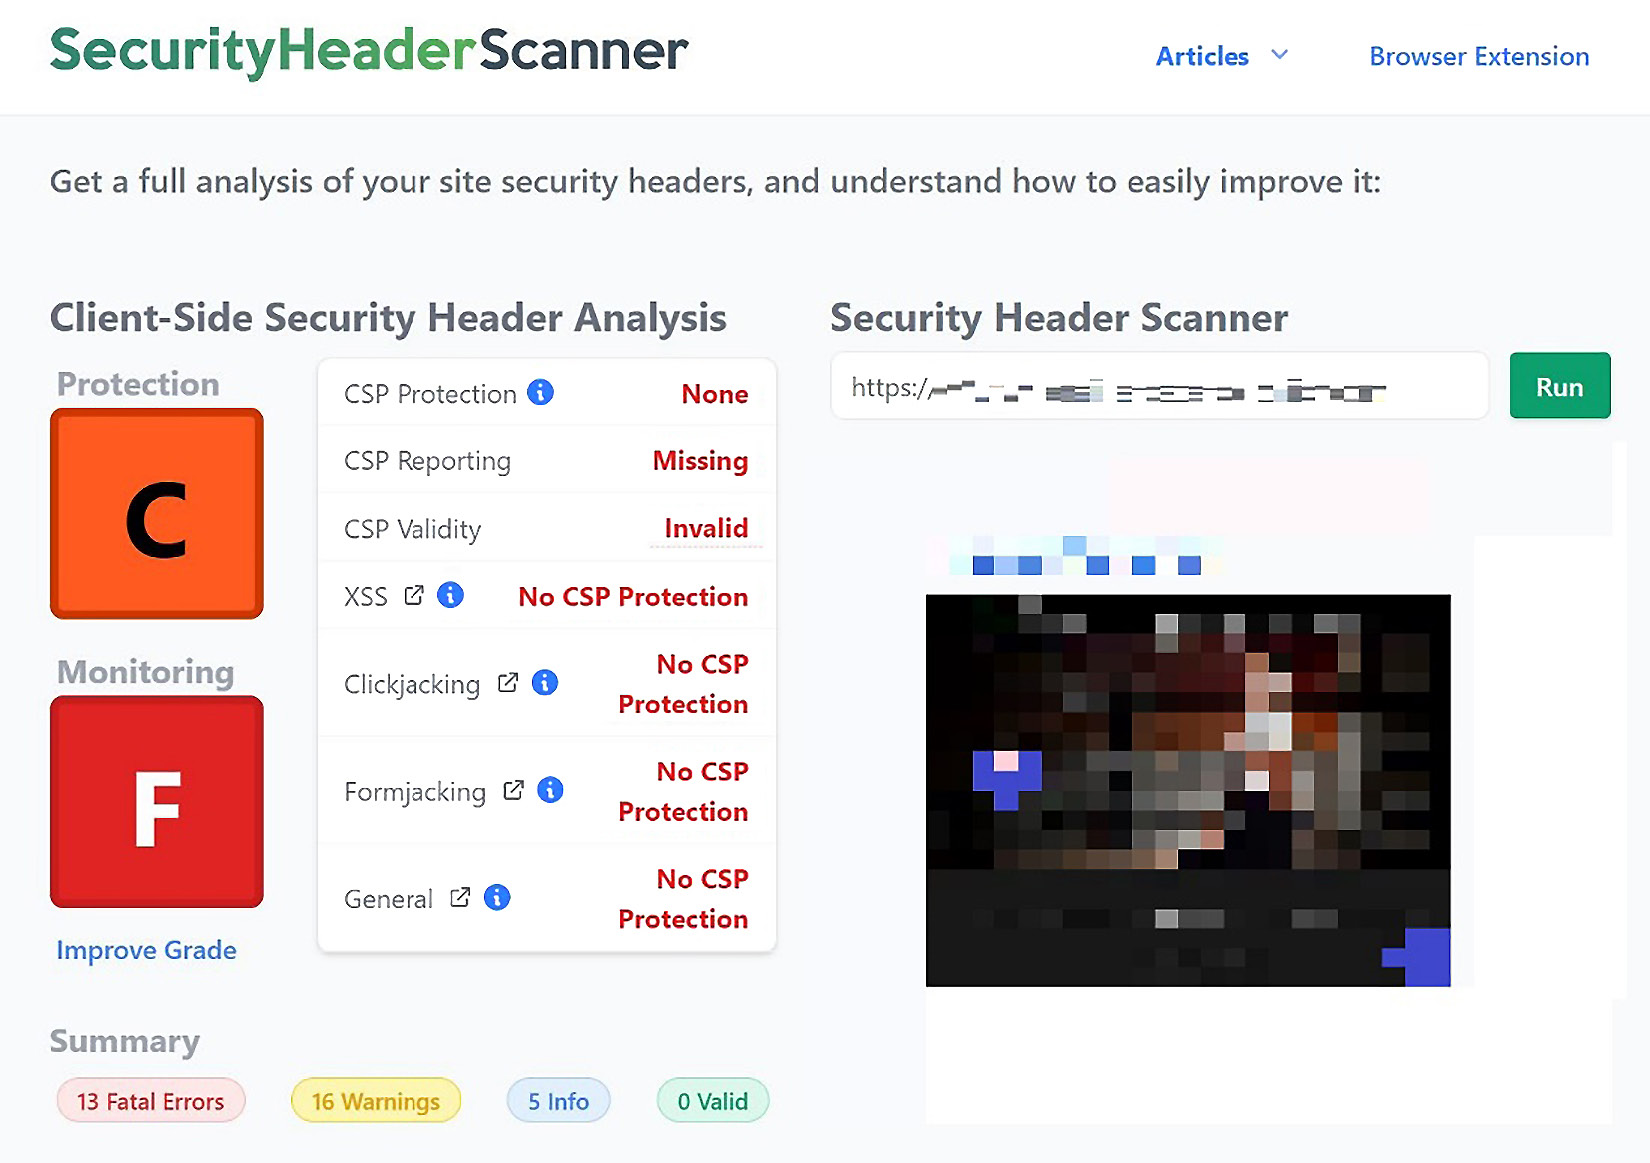 Figure 1.7 – The result from SecurityHeaderScanner.com after scanning my client
